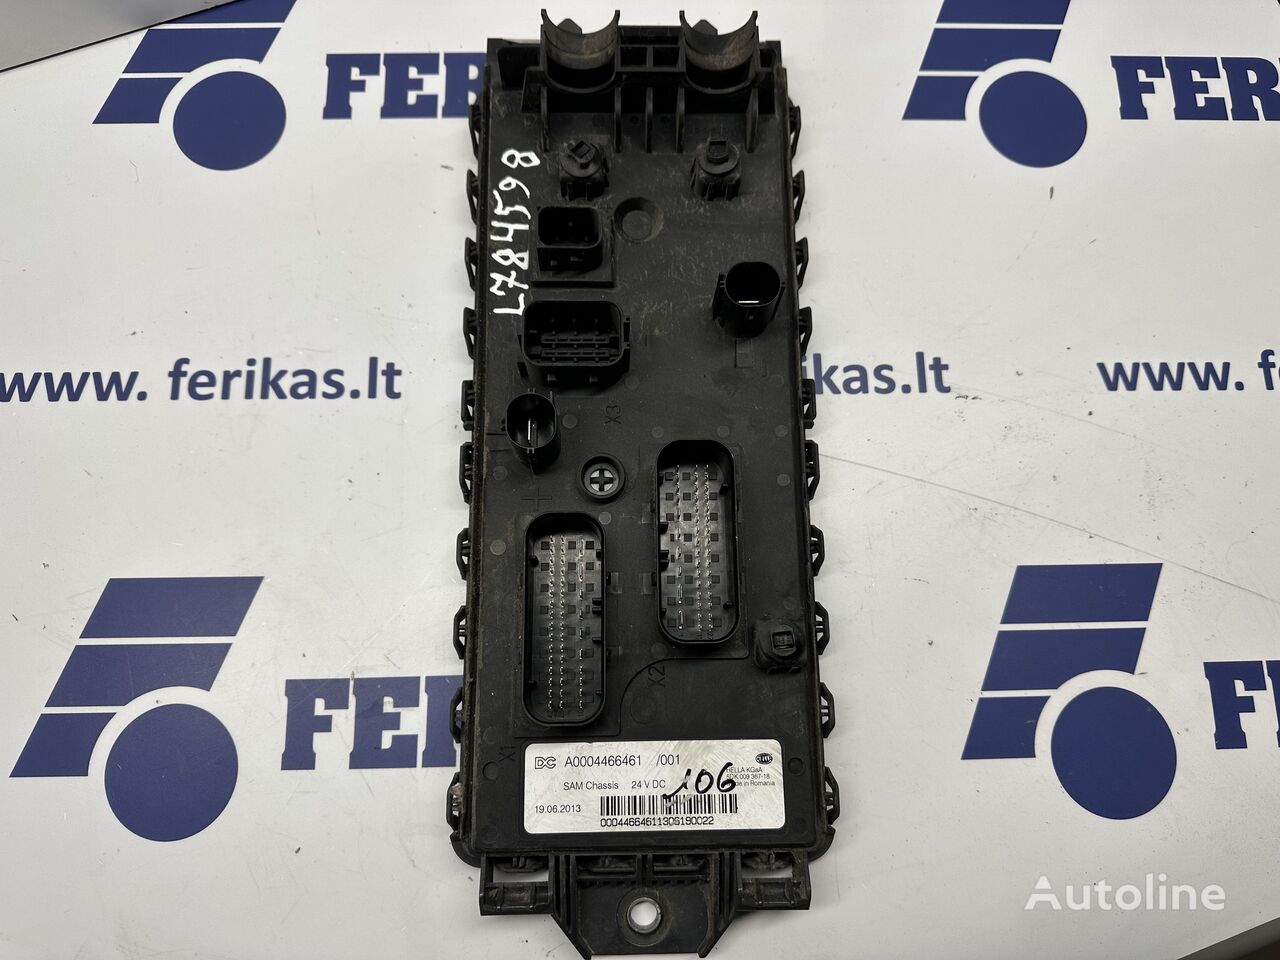 Mercedes-Benz Chassis control unit A0004466461 for Mercedes-Benz Actros MP4 SAM Chassis truck tractor